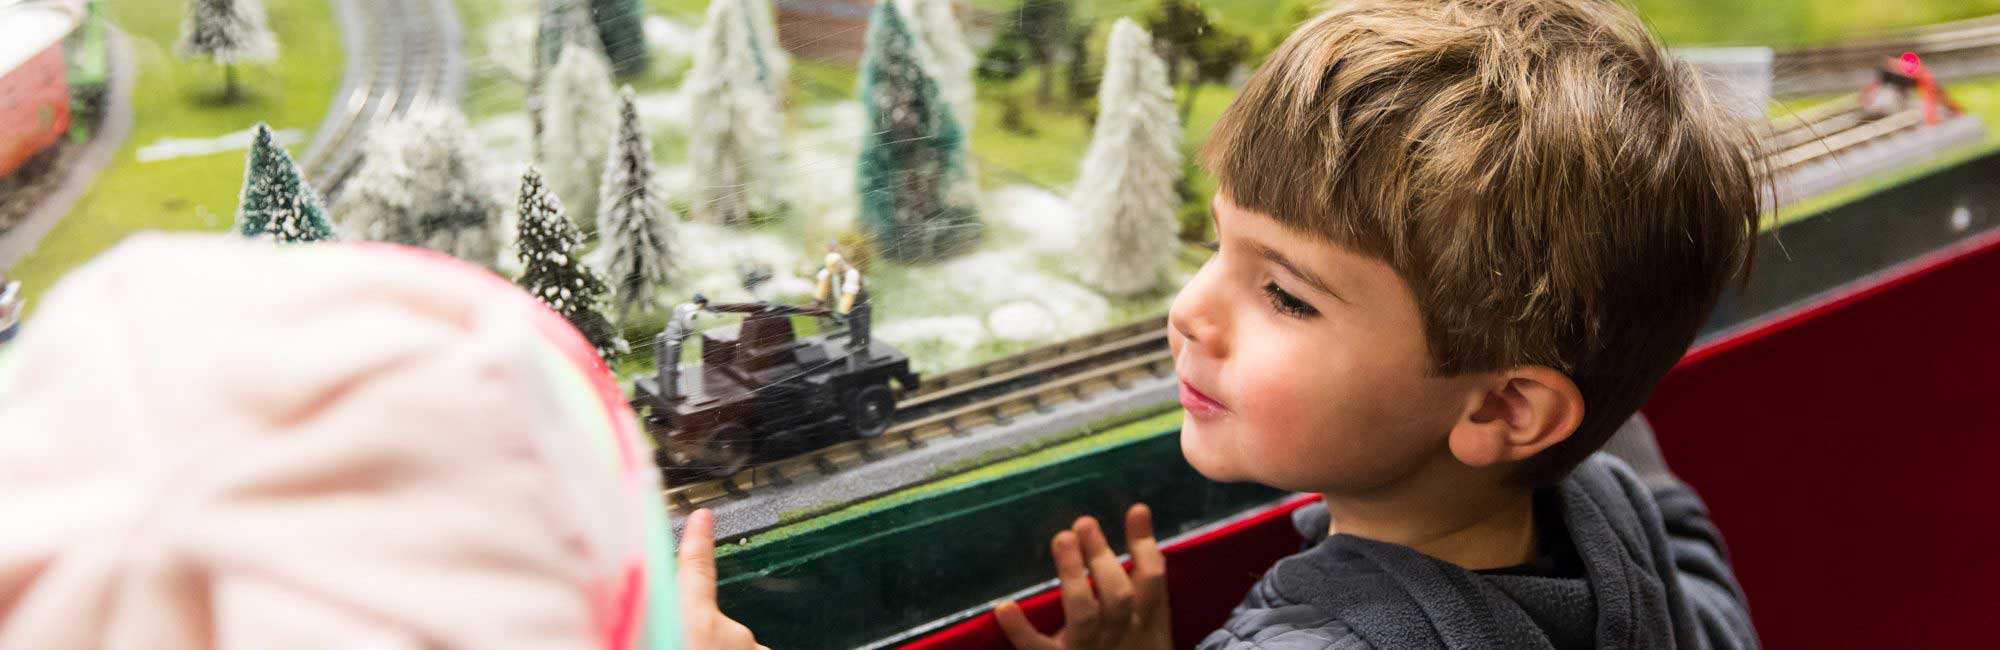 child looks in wonder at toy trains